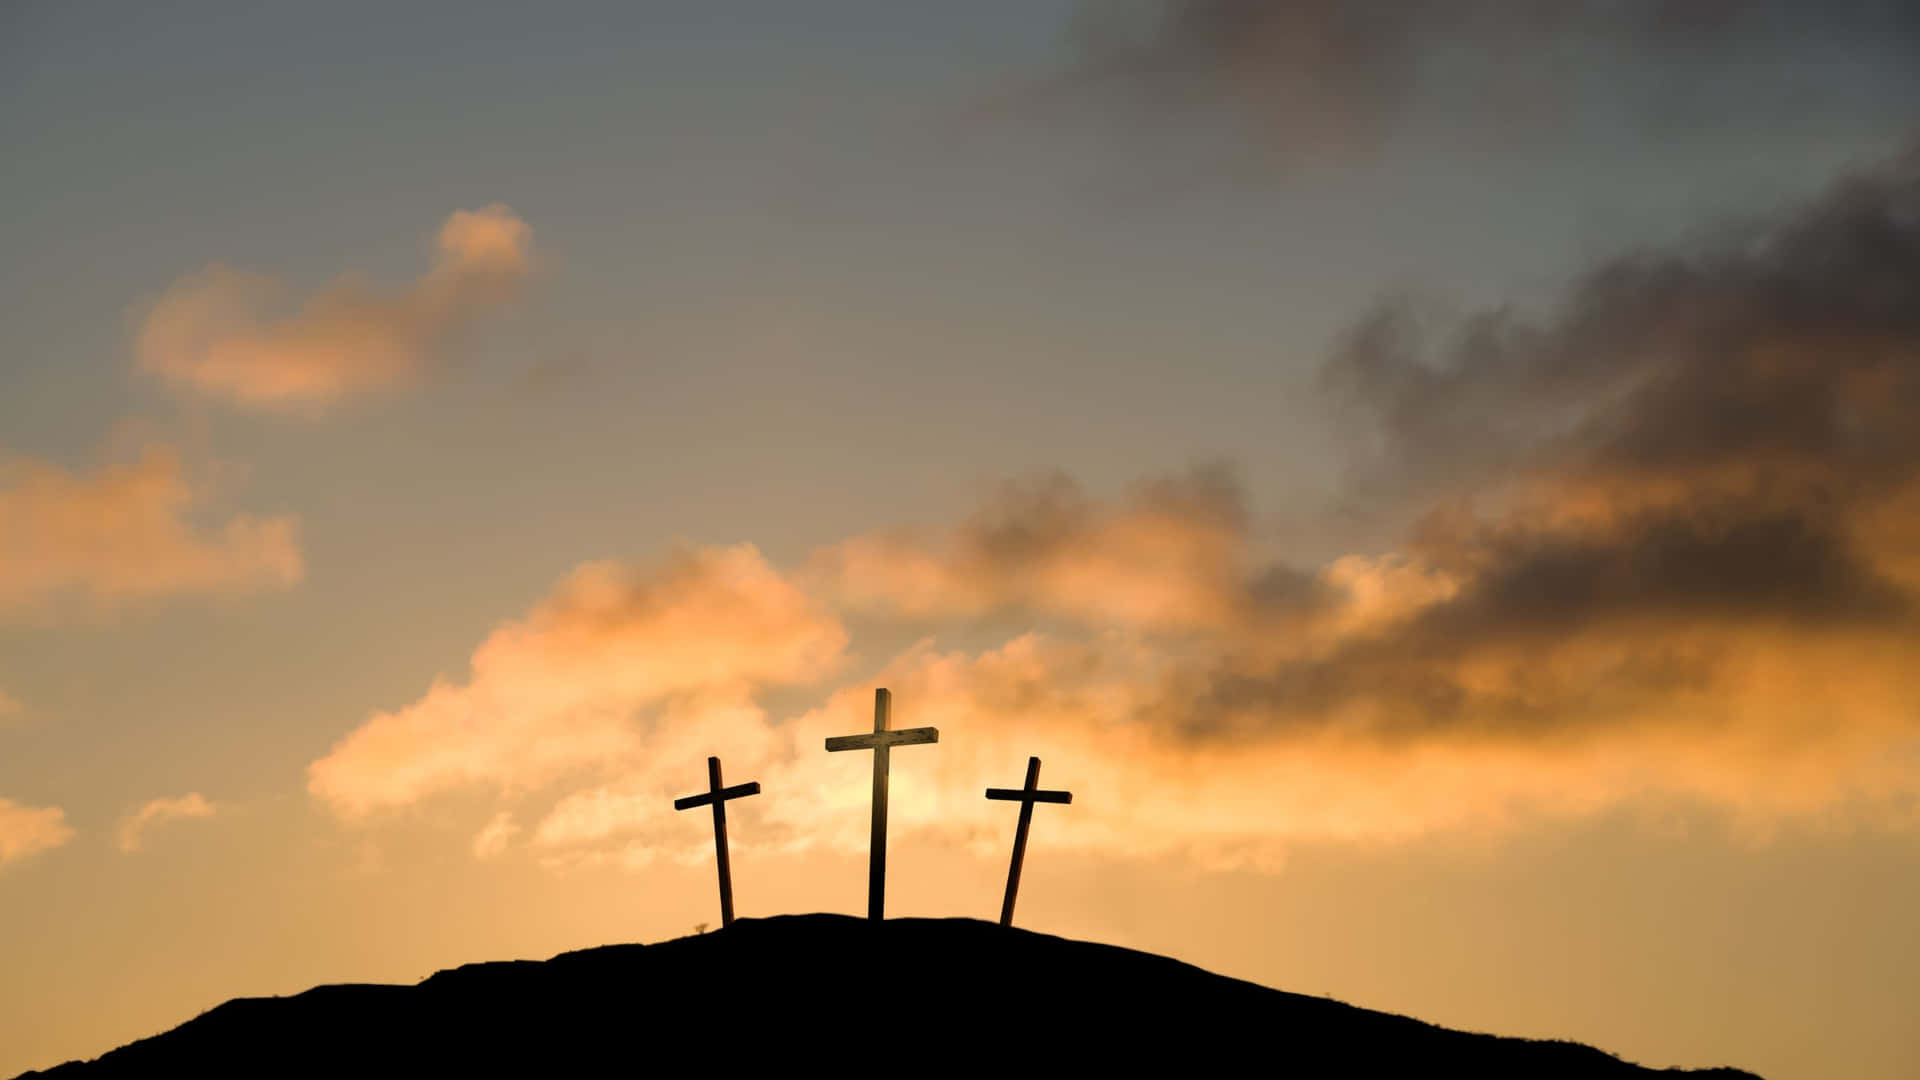 Good Friday - A day of reflection